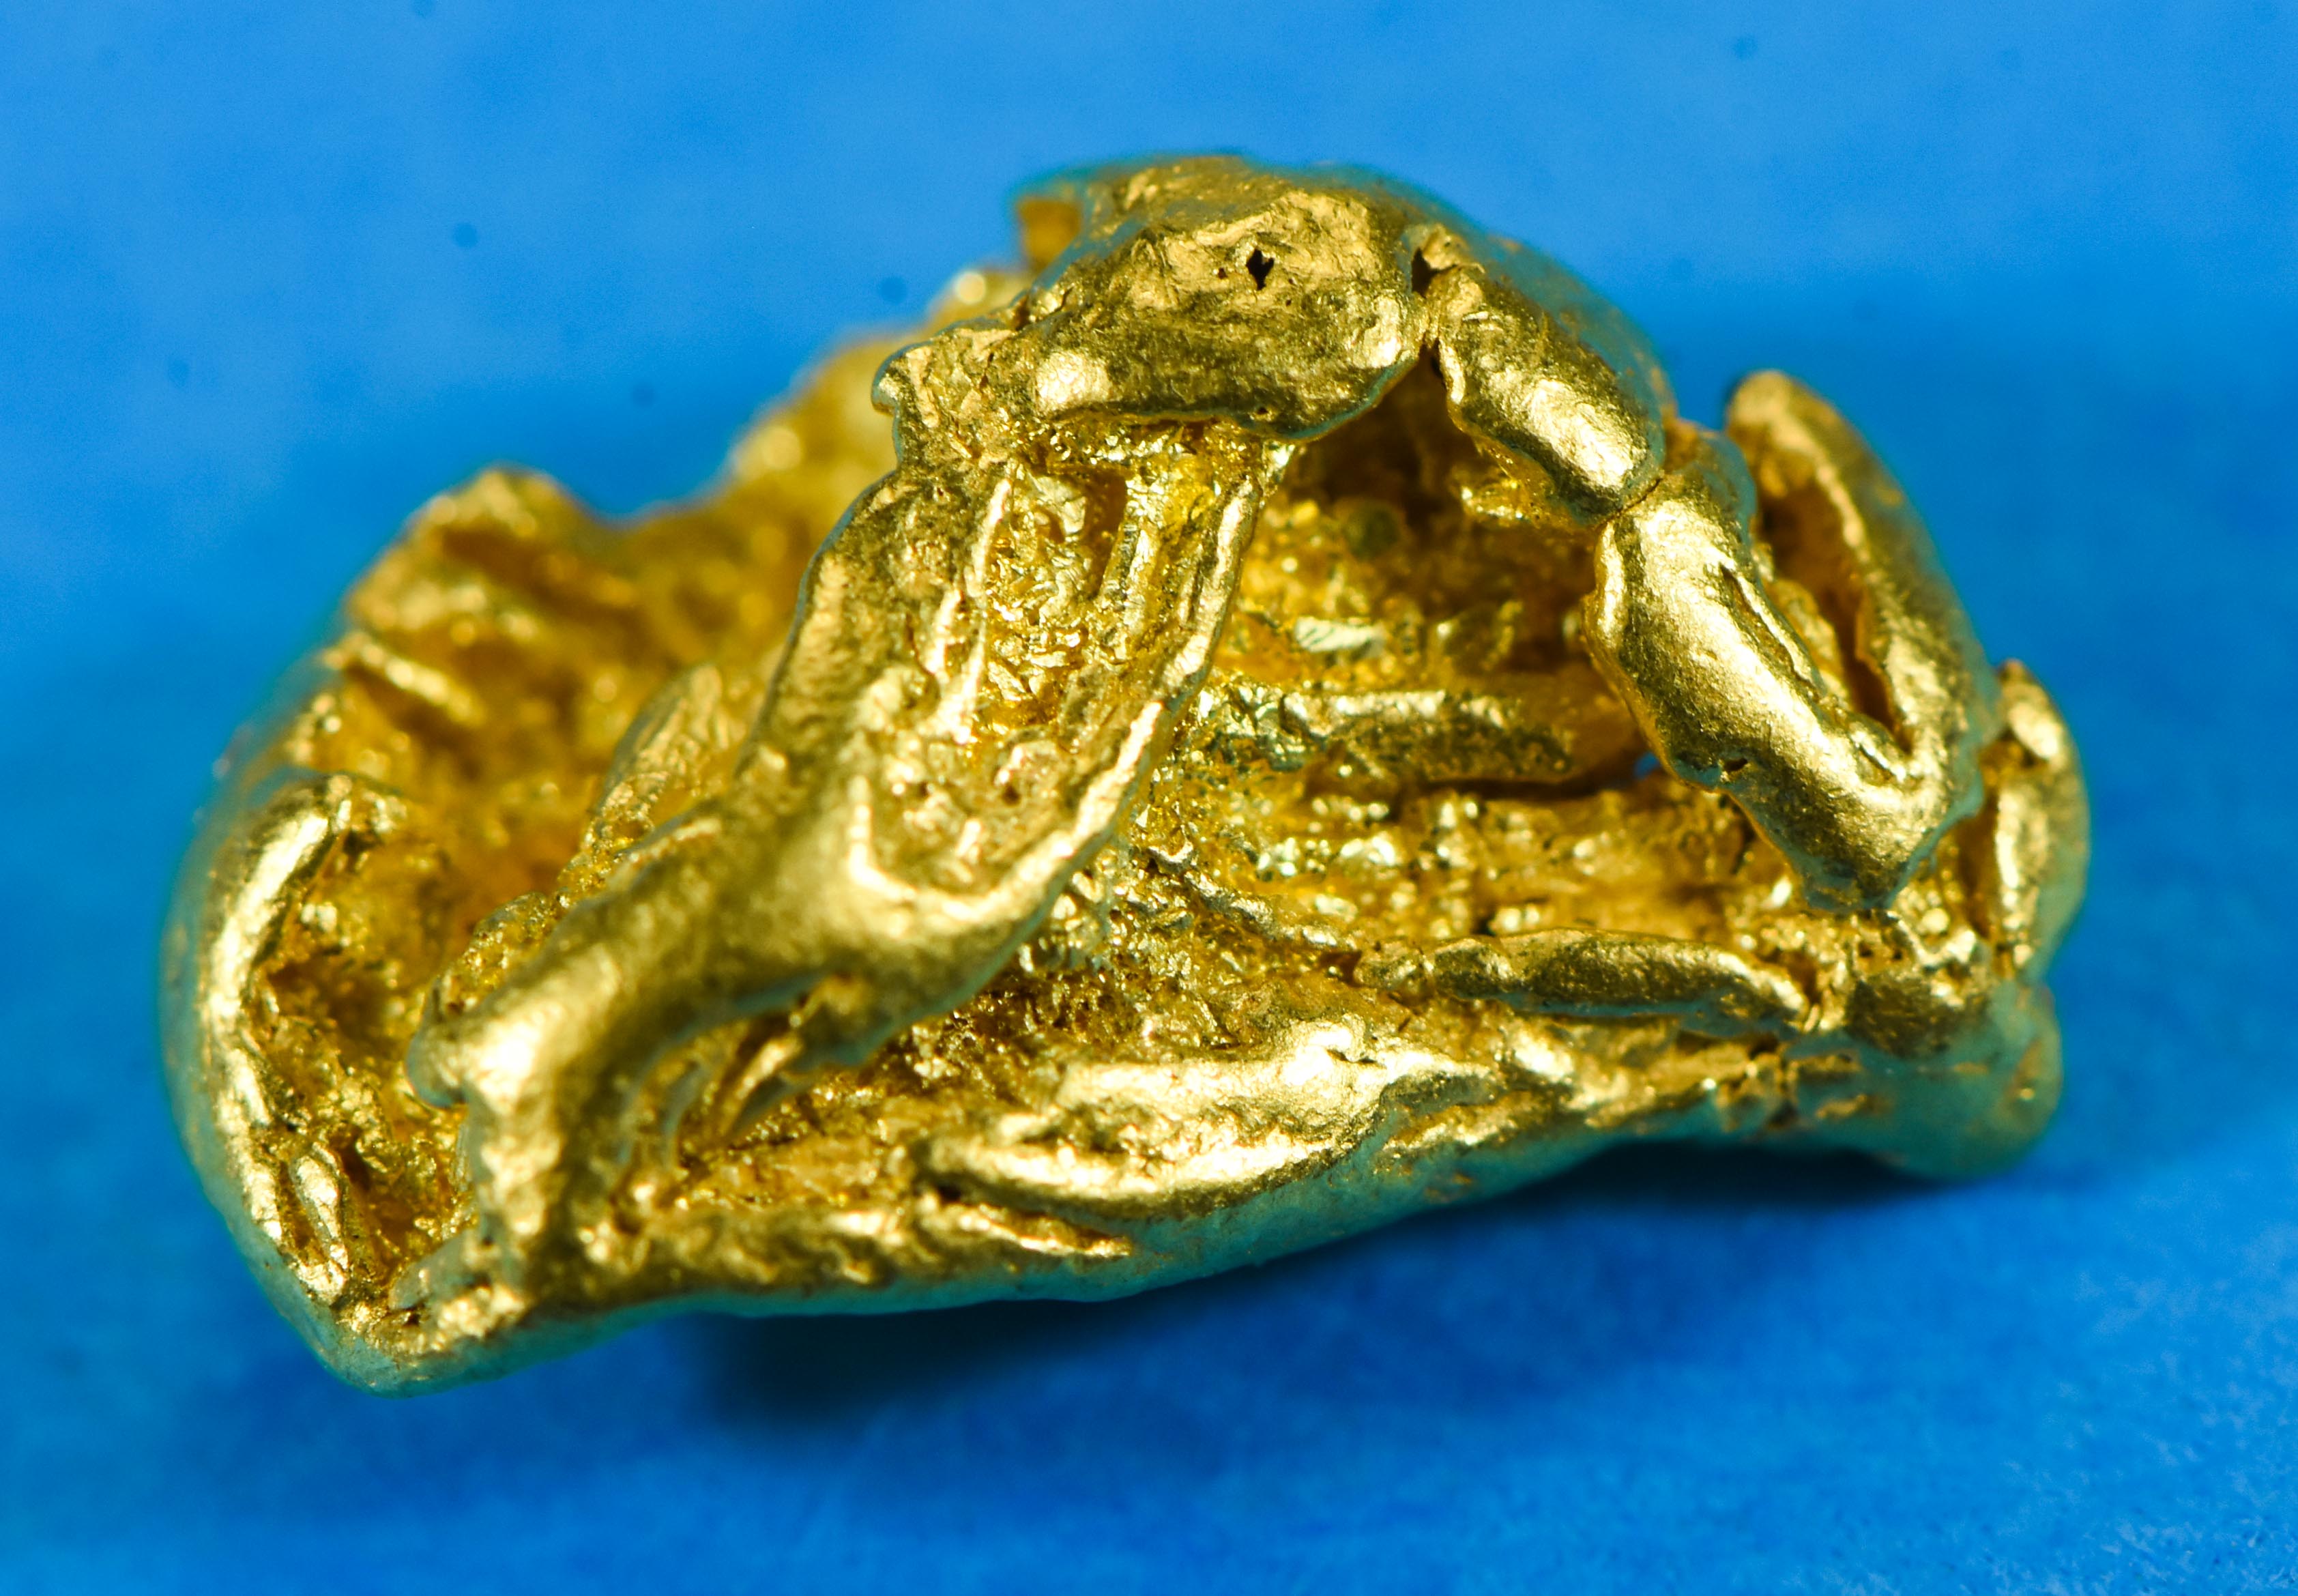 L-8 Alaskan BC Dendritic Exotic Shaped Gold Nugget "Special Collection" 3.20 Grams